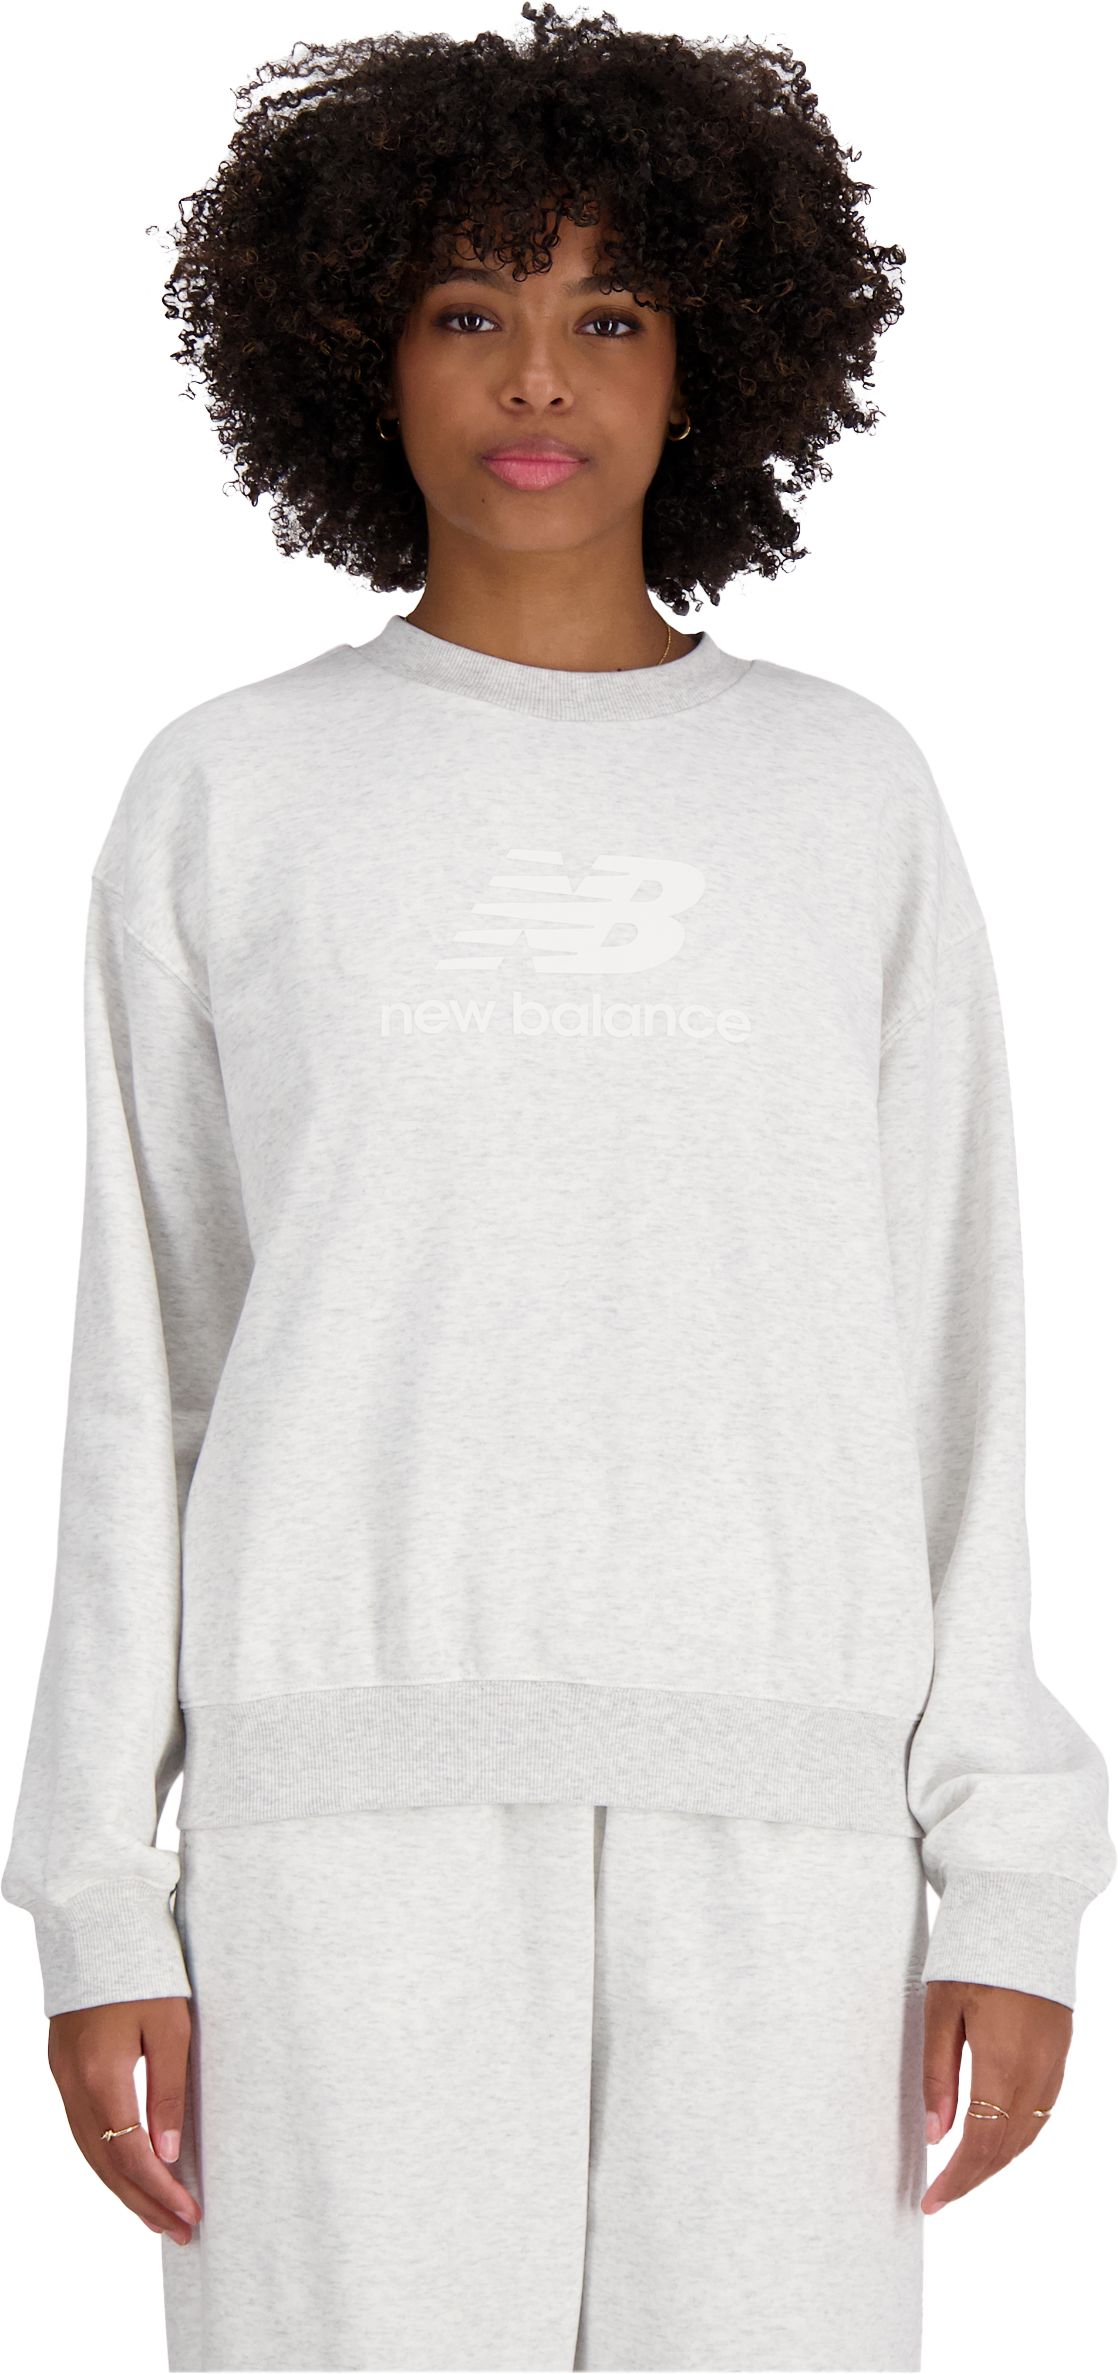 NEW BALANCE, W FRENCH TERRY STACKED LOGO CREW